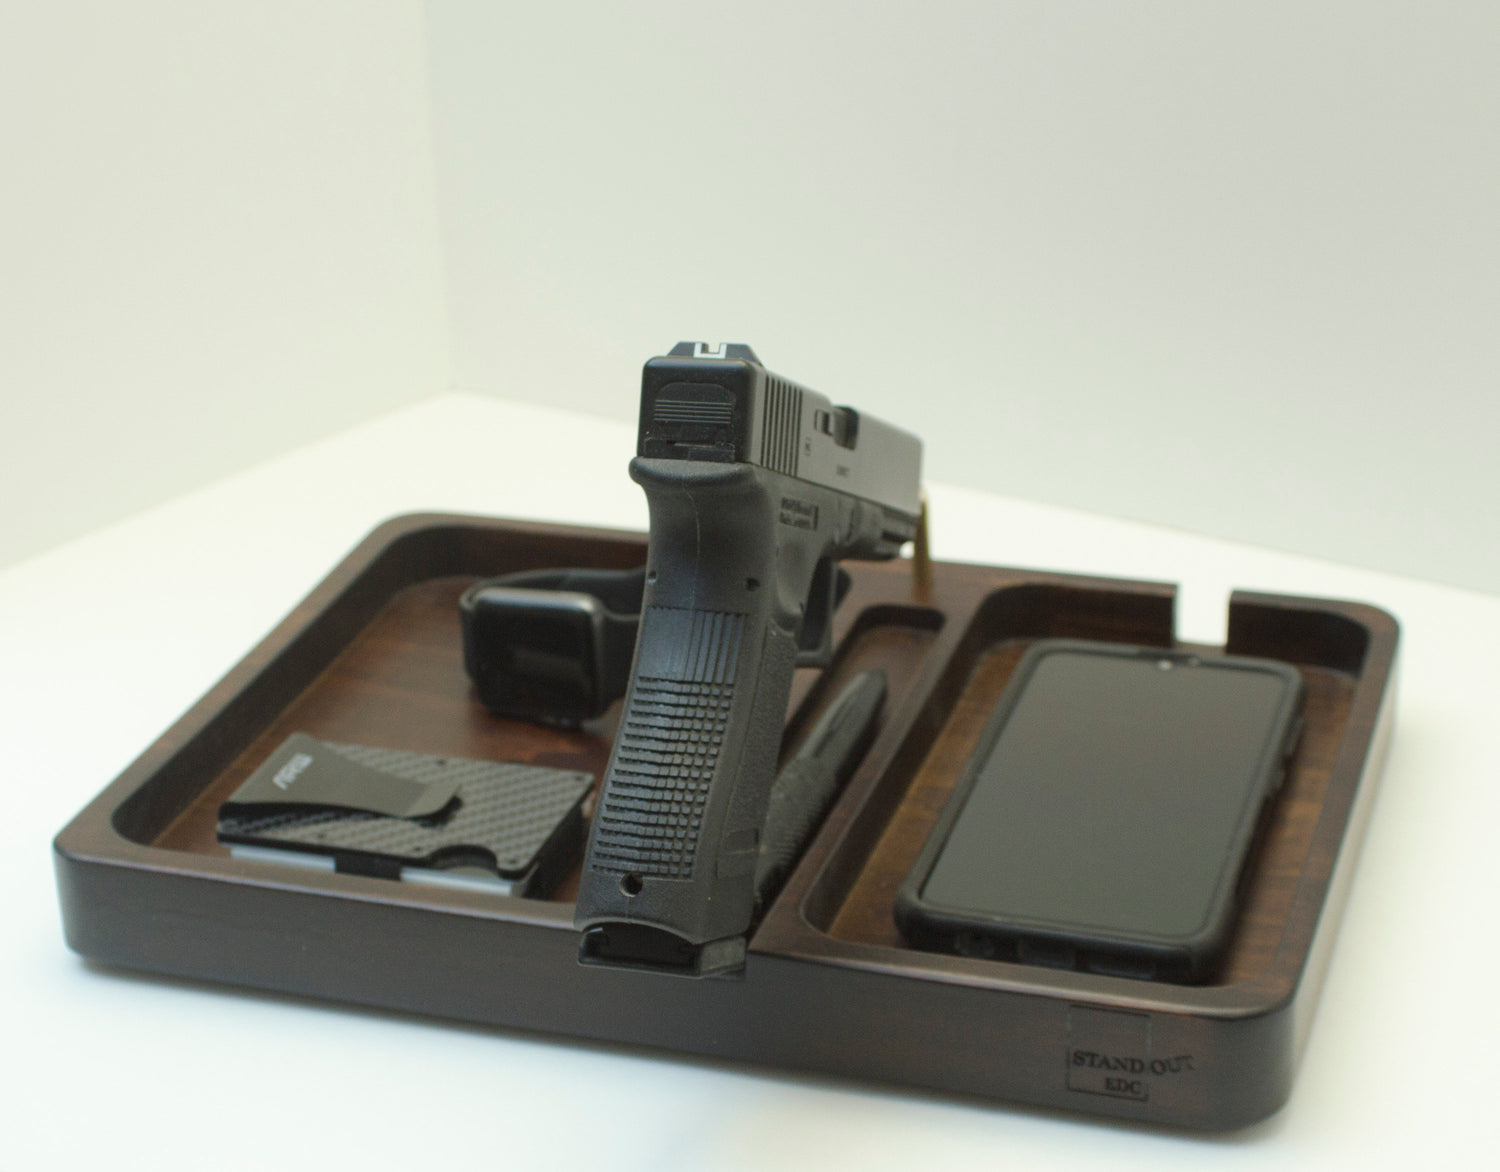 edc dump tray, Personalized gift for men, tech organizer, display charger  Standout EDC   